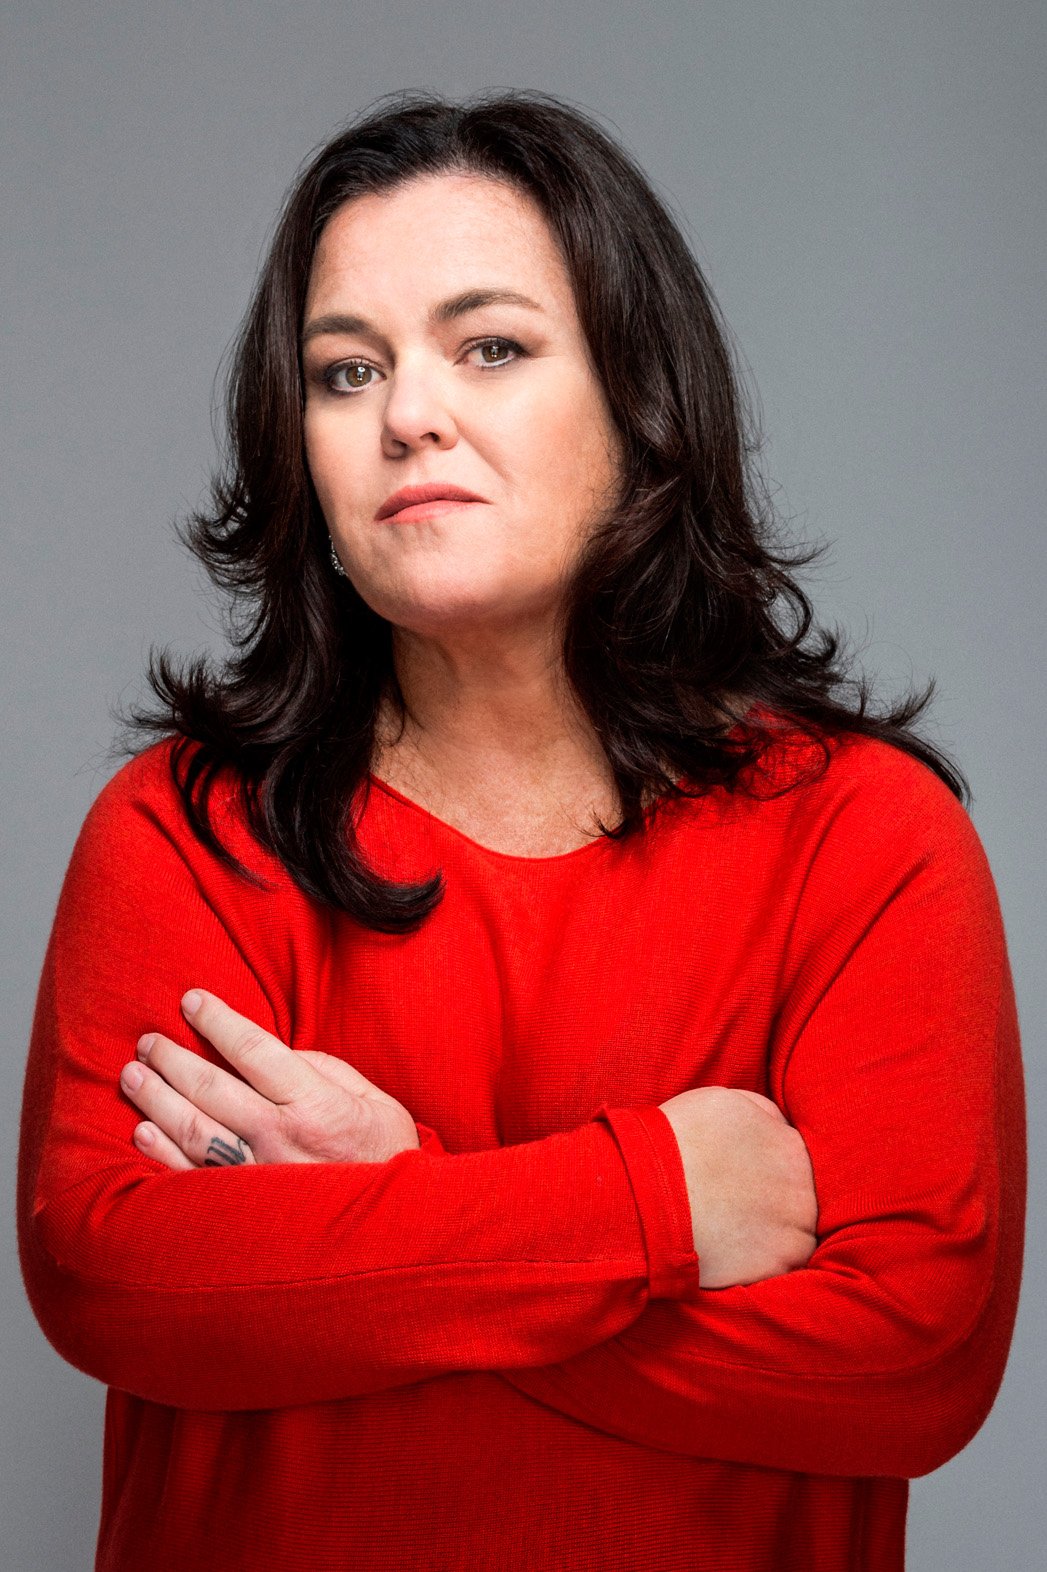 rosie-o-donnell-2015